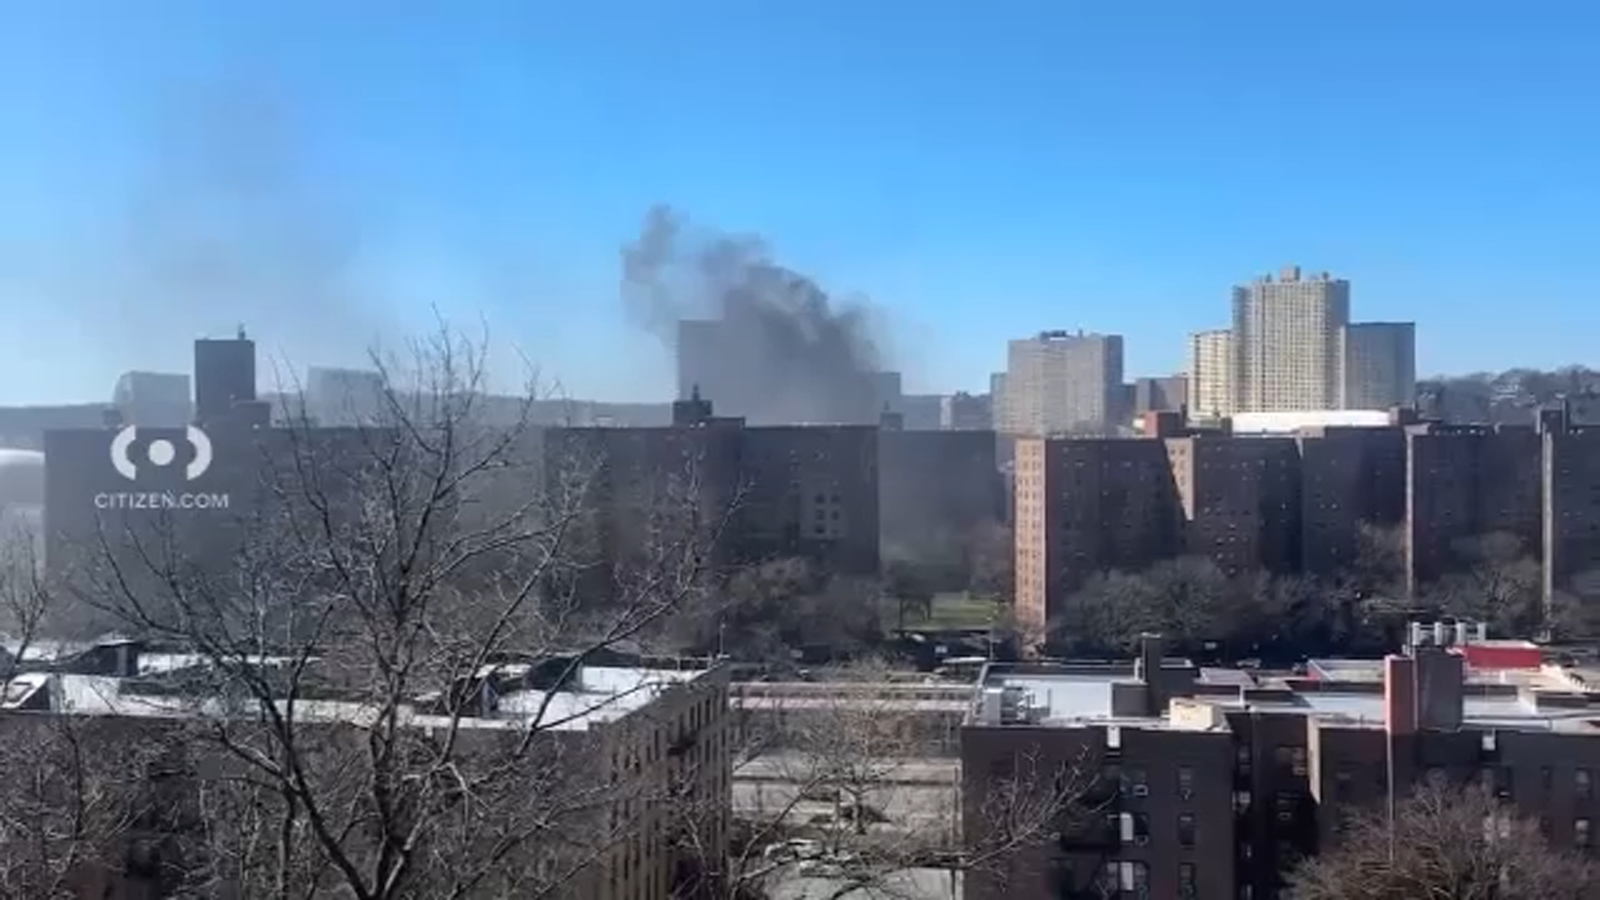 Marble Hill fire: Lithium-ion batteries found at apartment building after blaze injures 10 people [Video]